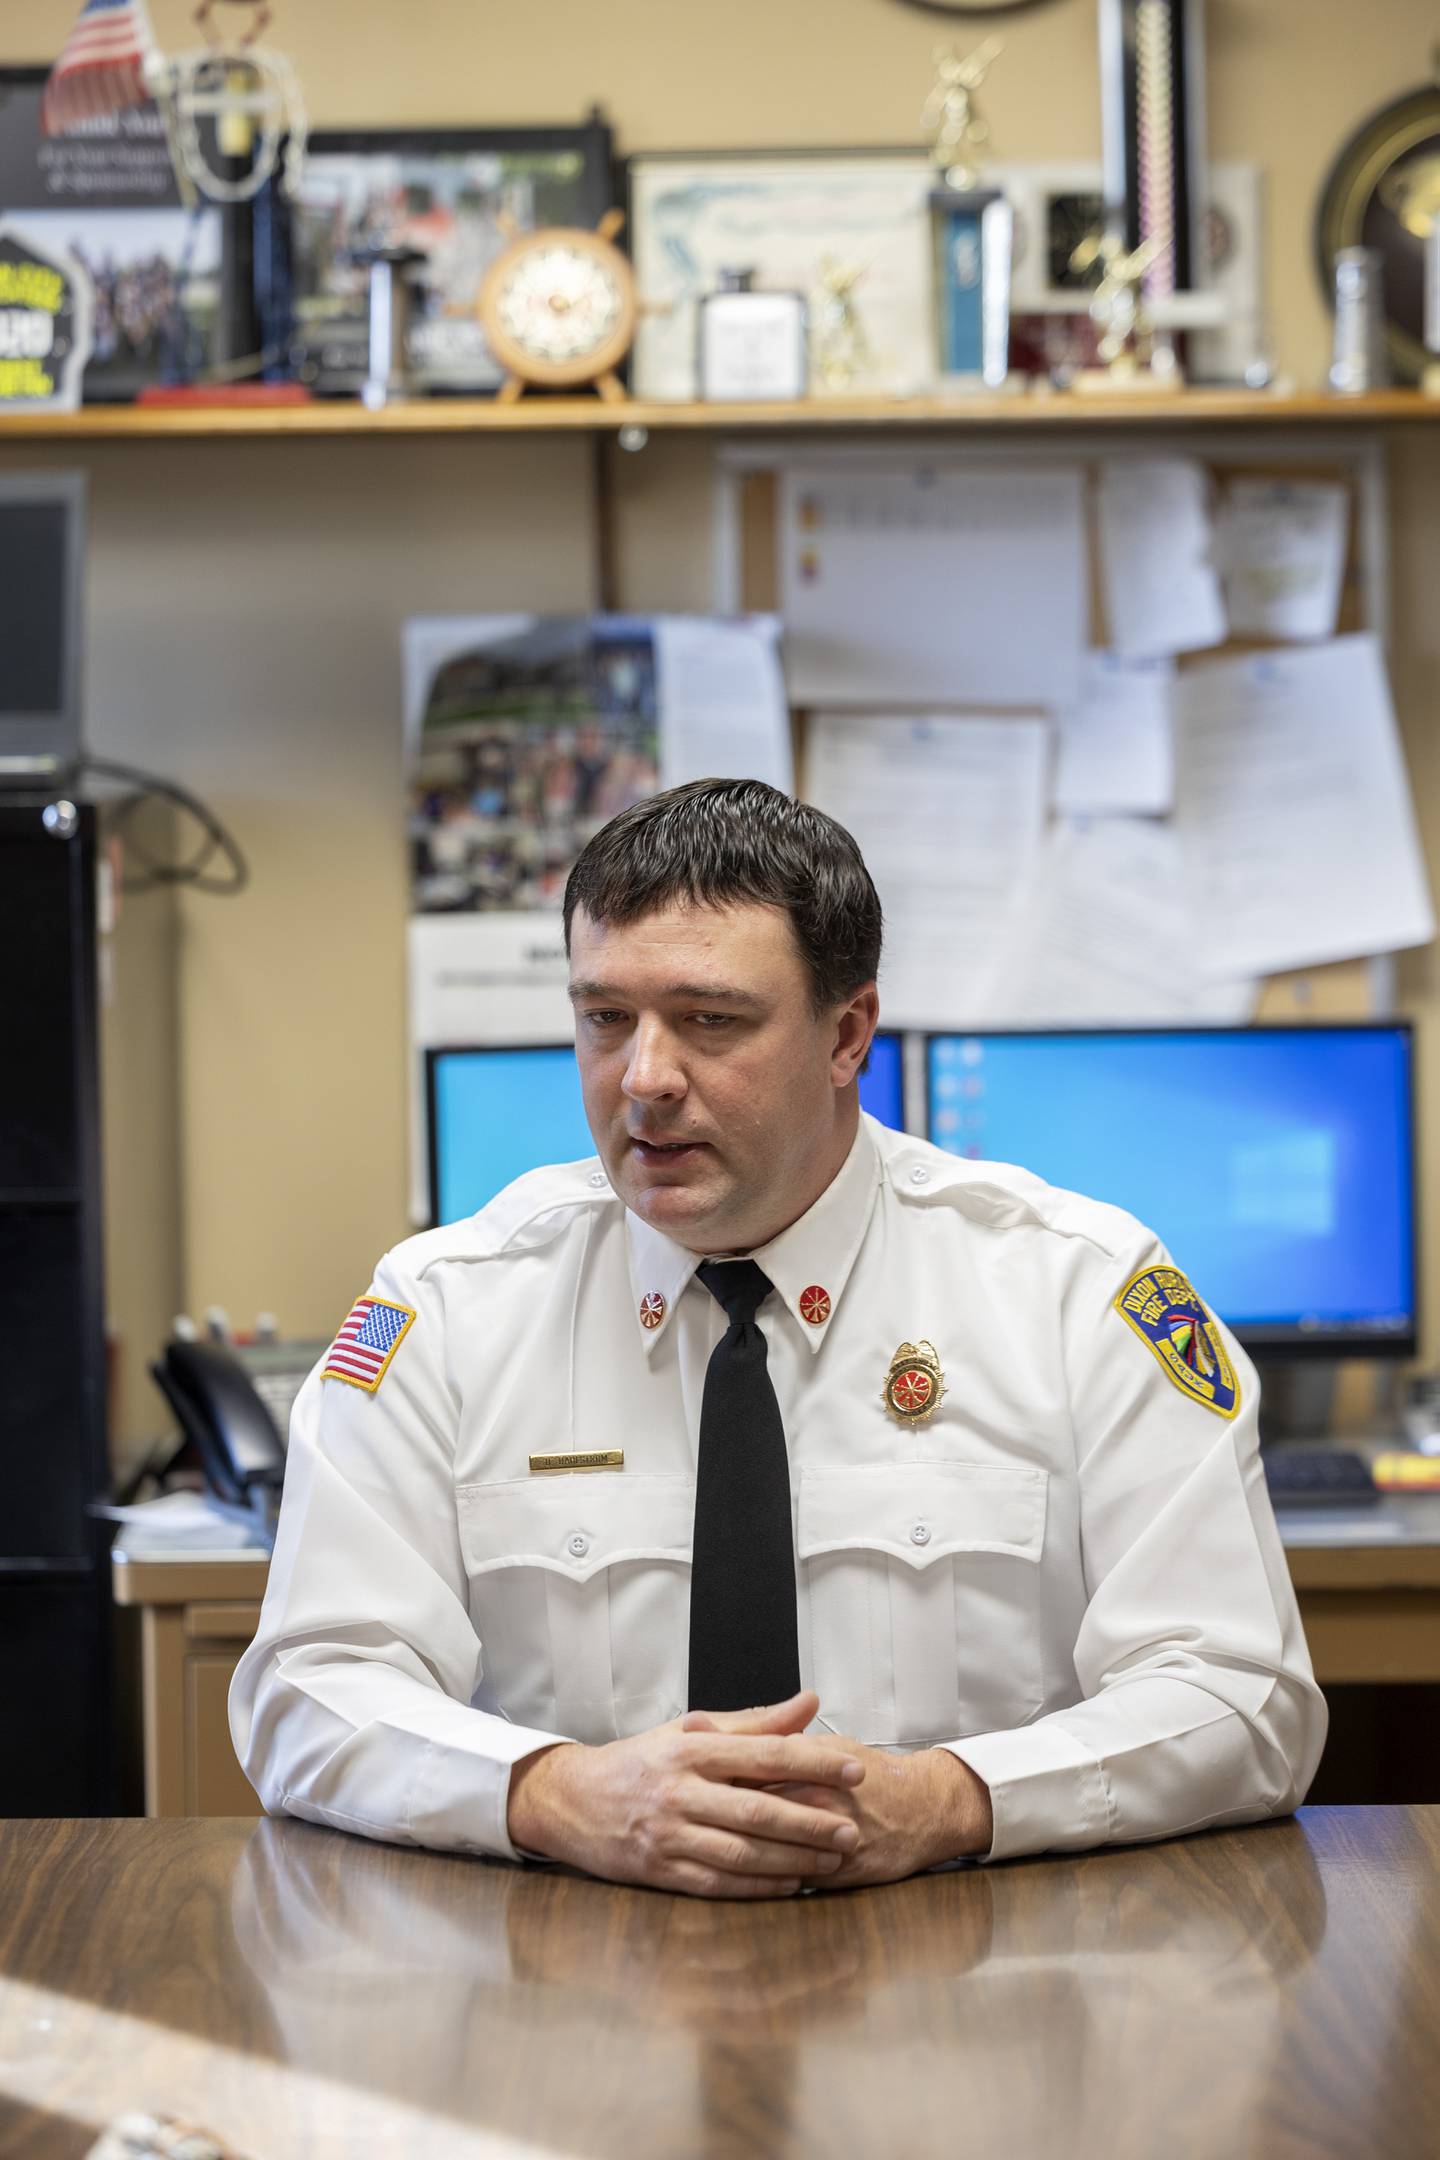 Dustin Dahlstrom has been named new Dixon Rural Fire Chief.